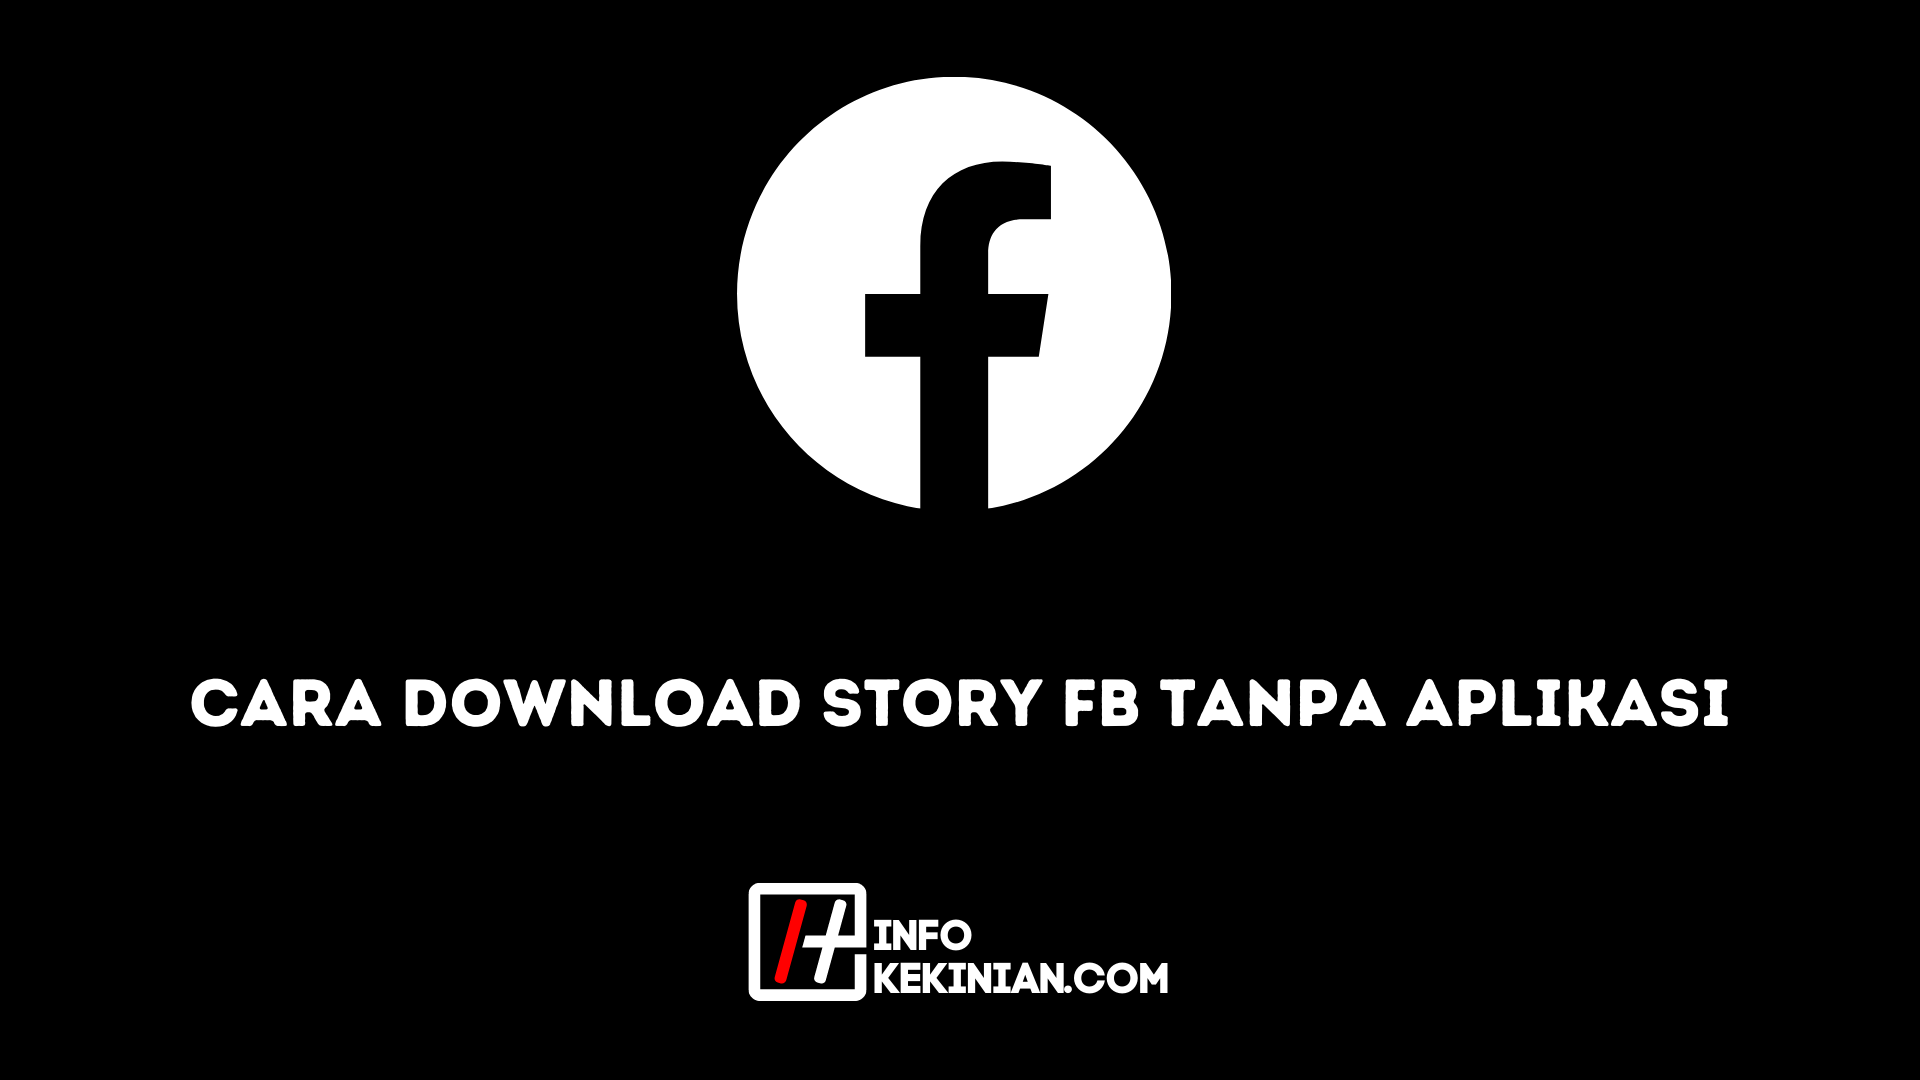 How to download fb stories without an application